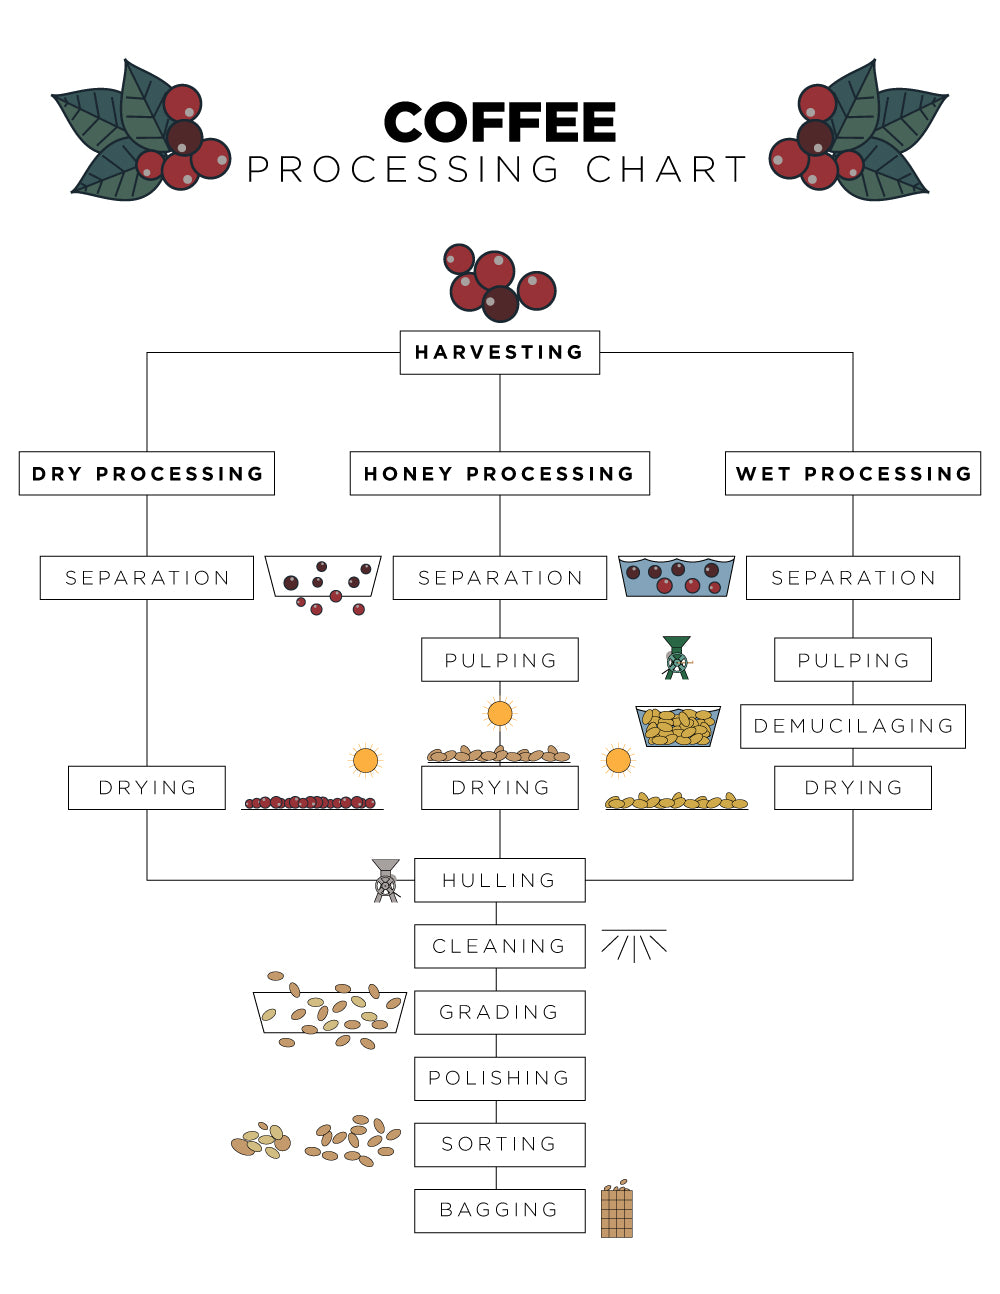 Graph Showing the Stages of Specialty Coffee Processing